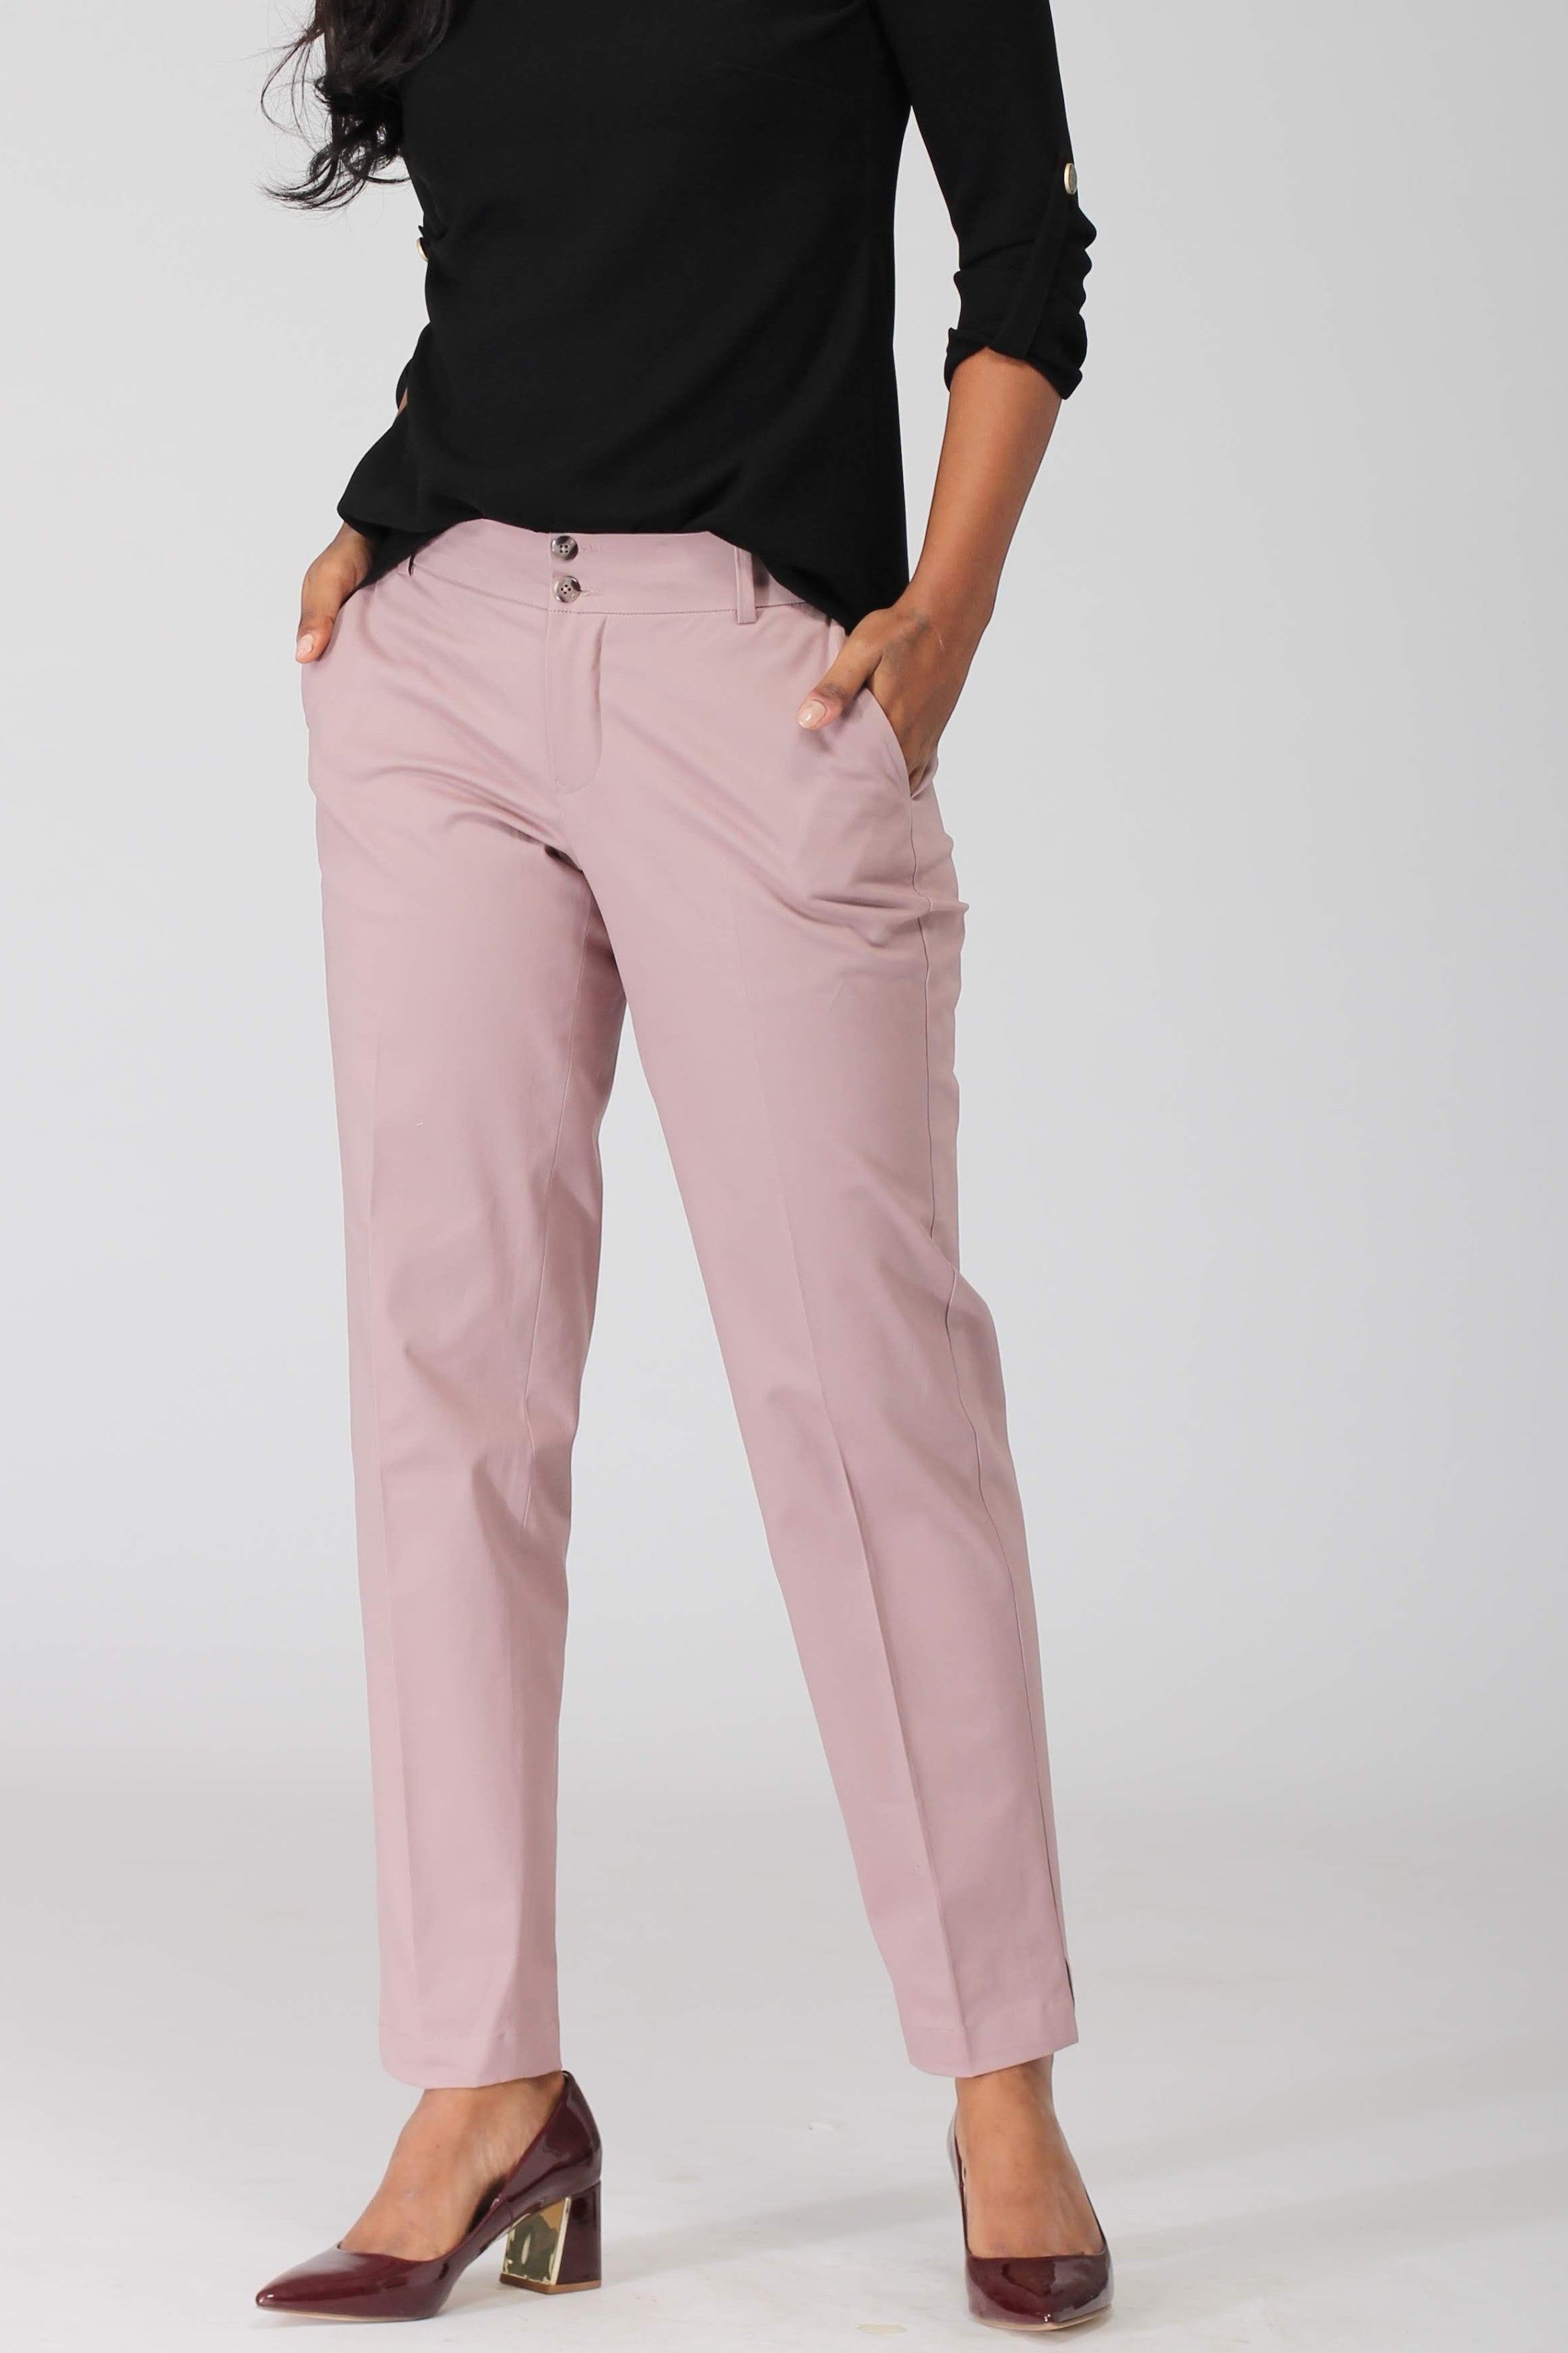 Buy Baby Pink Palazzo Pant Cotton Silk for Best Price Reviews Free  Shipping